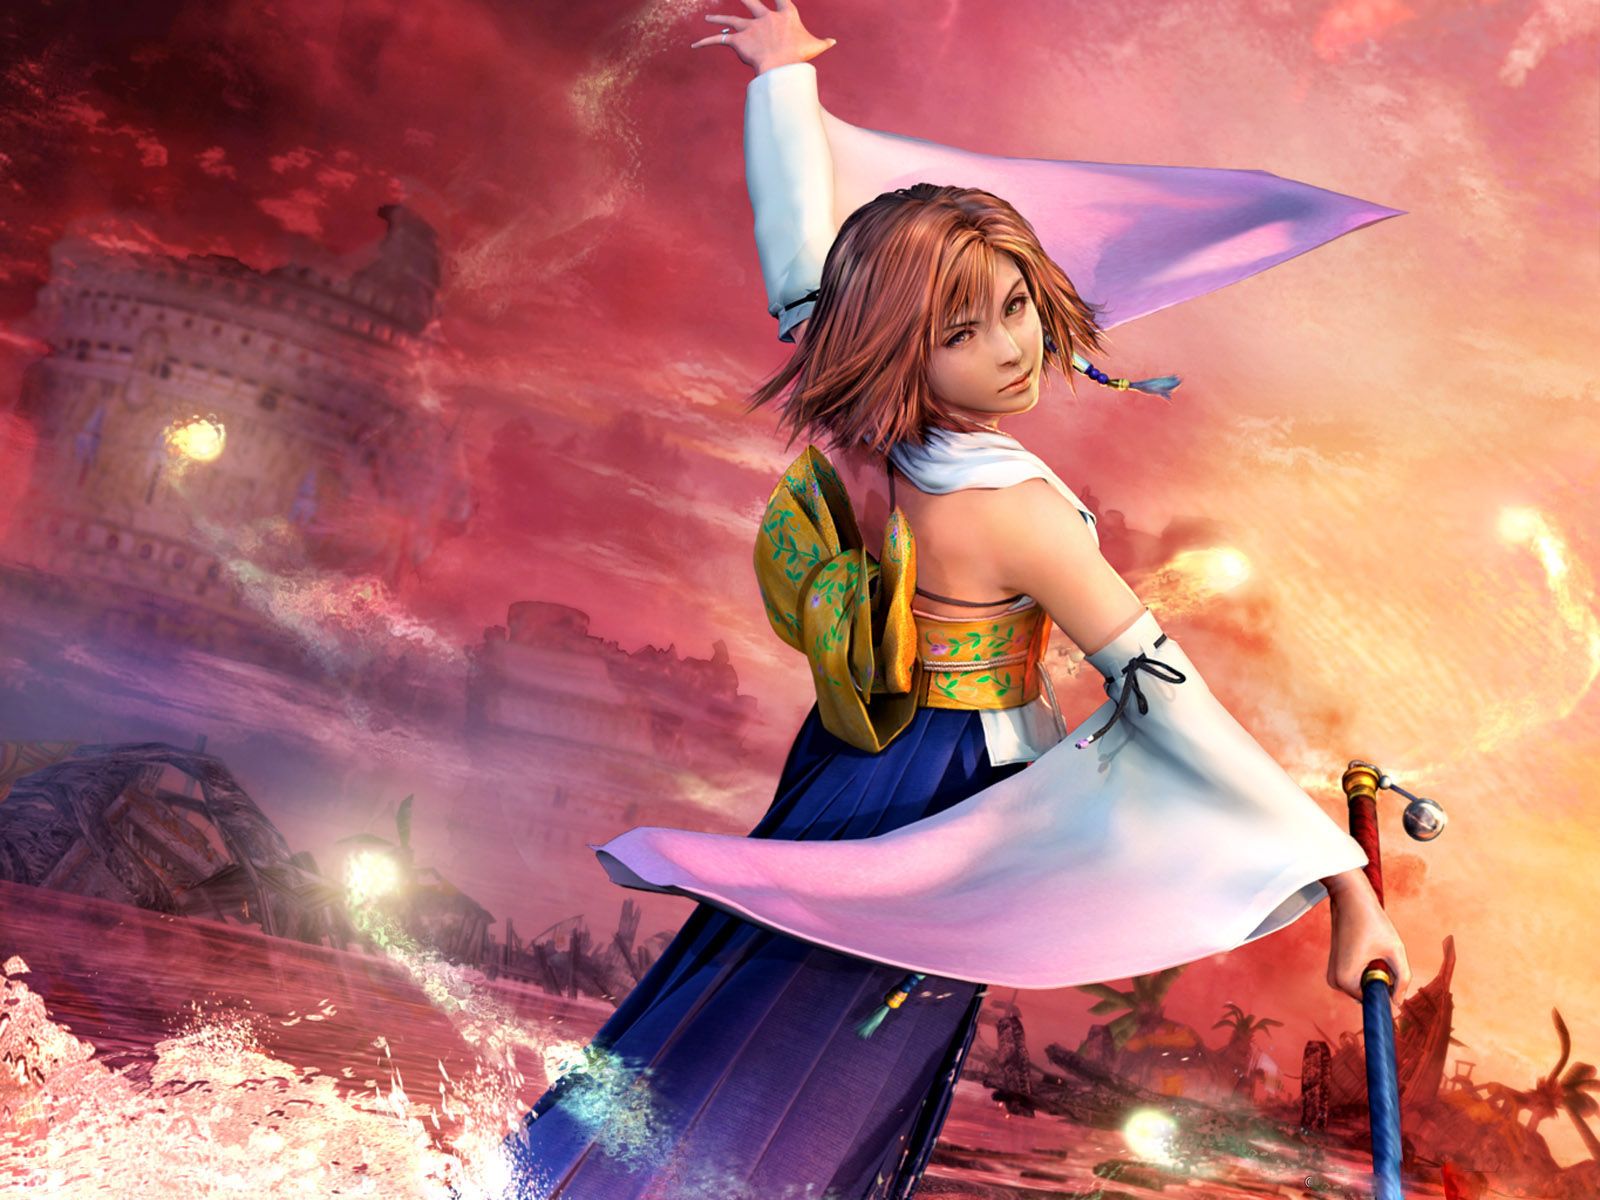 Ffx 2 To Be Bundled With X Hd Remake